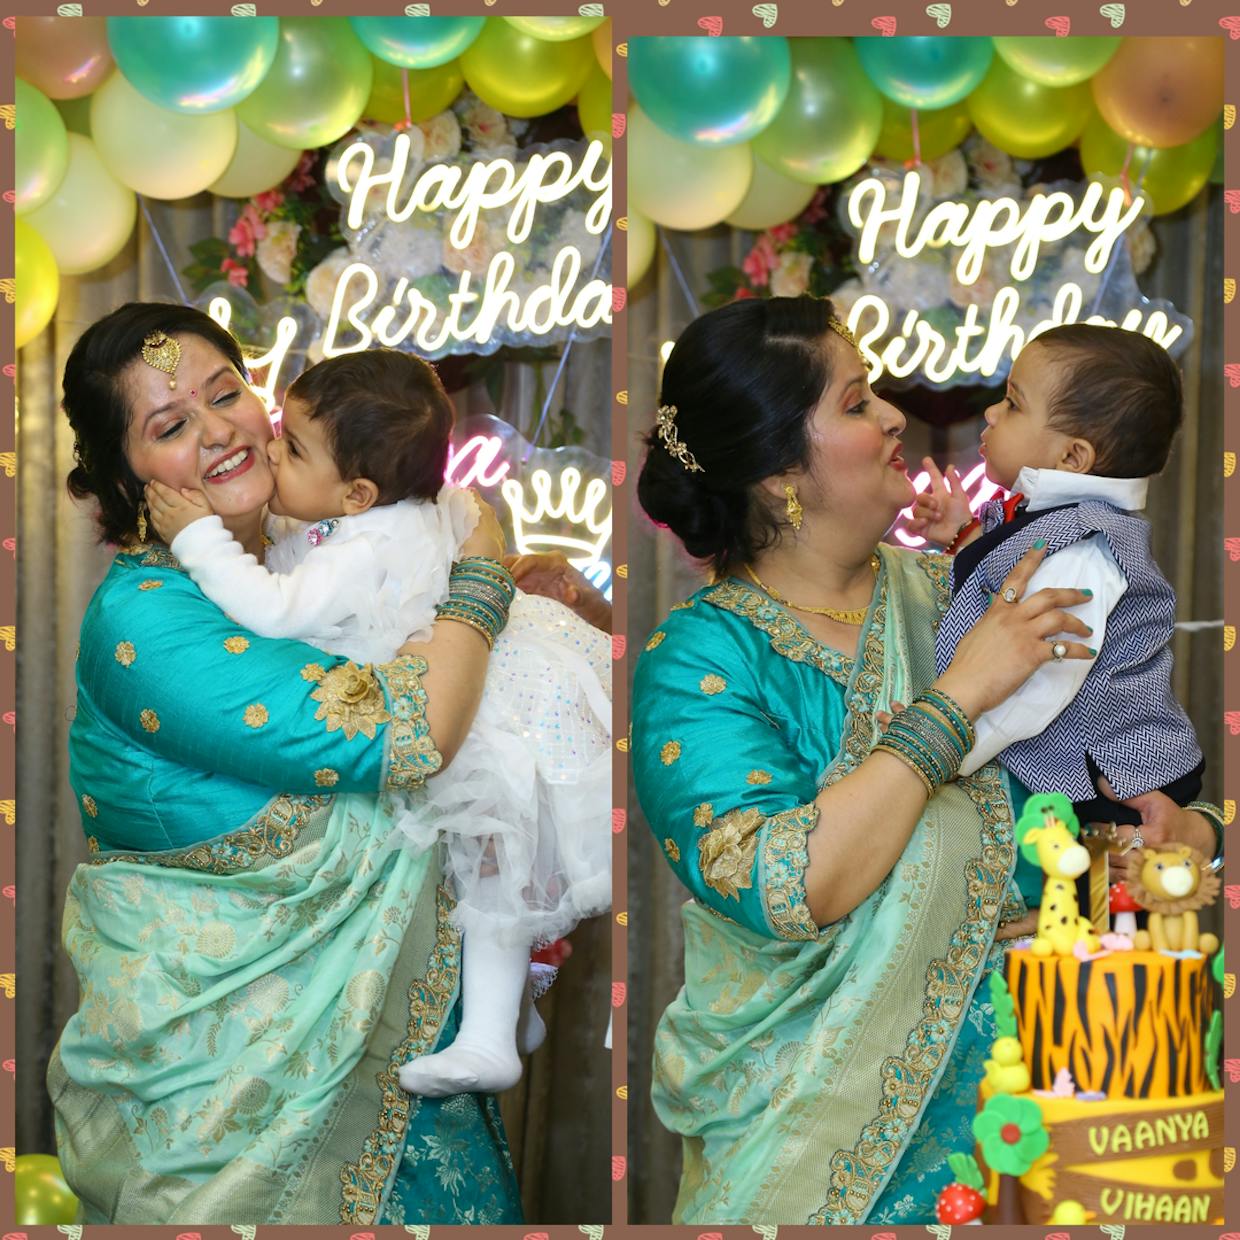 Happiness of completing 1 year of this special bond # 1st birthday of my twins# showering abundance of love